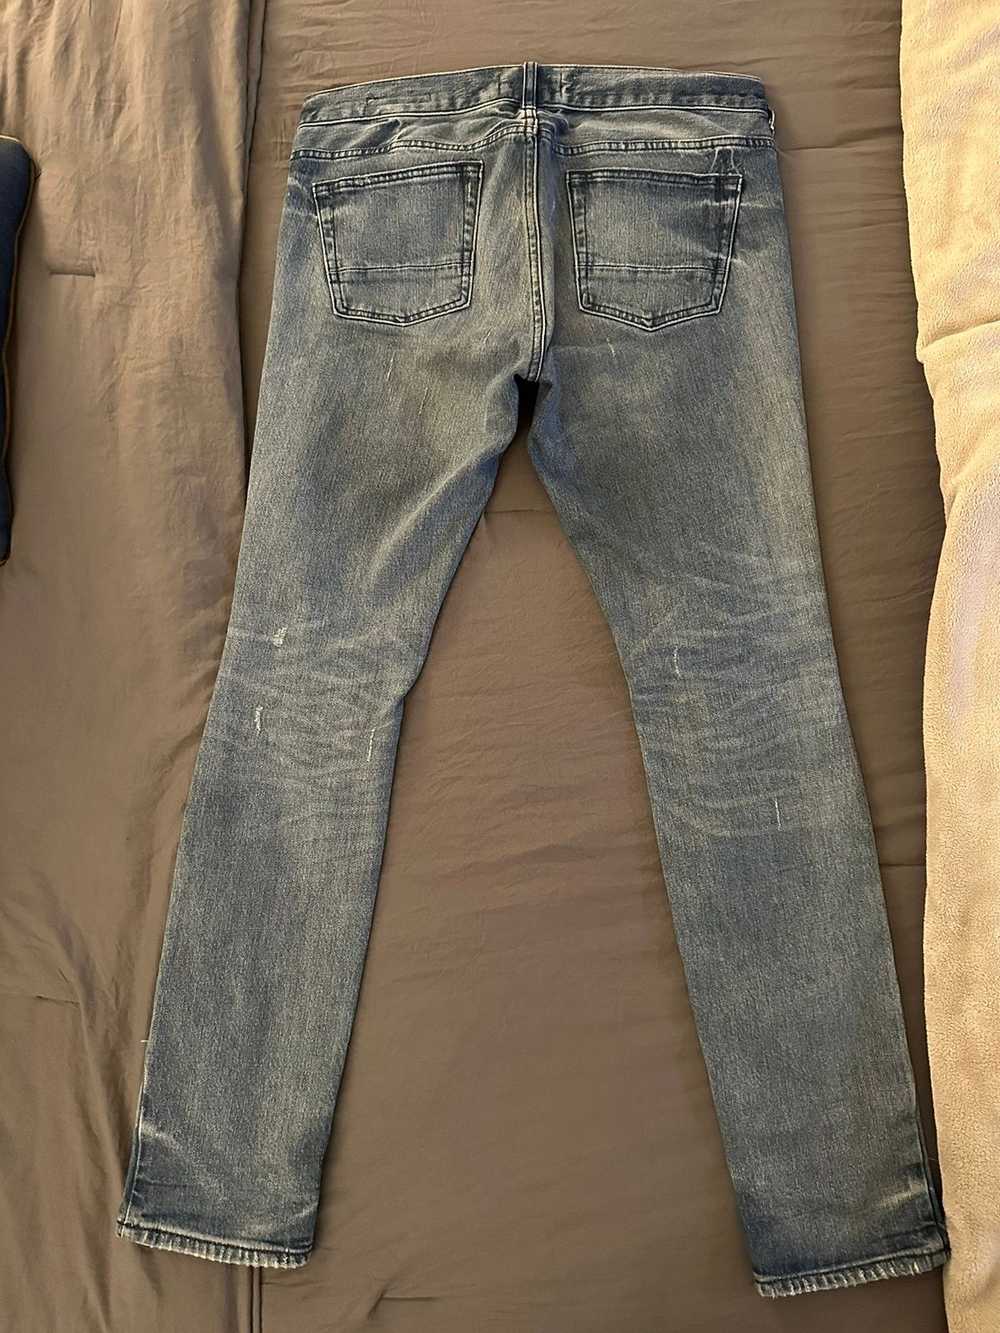 Pacsun Men’s Ripped Skinny Jeans - image 2